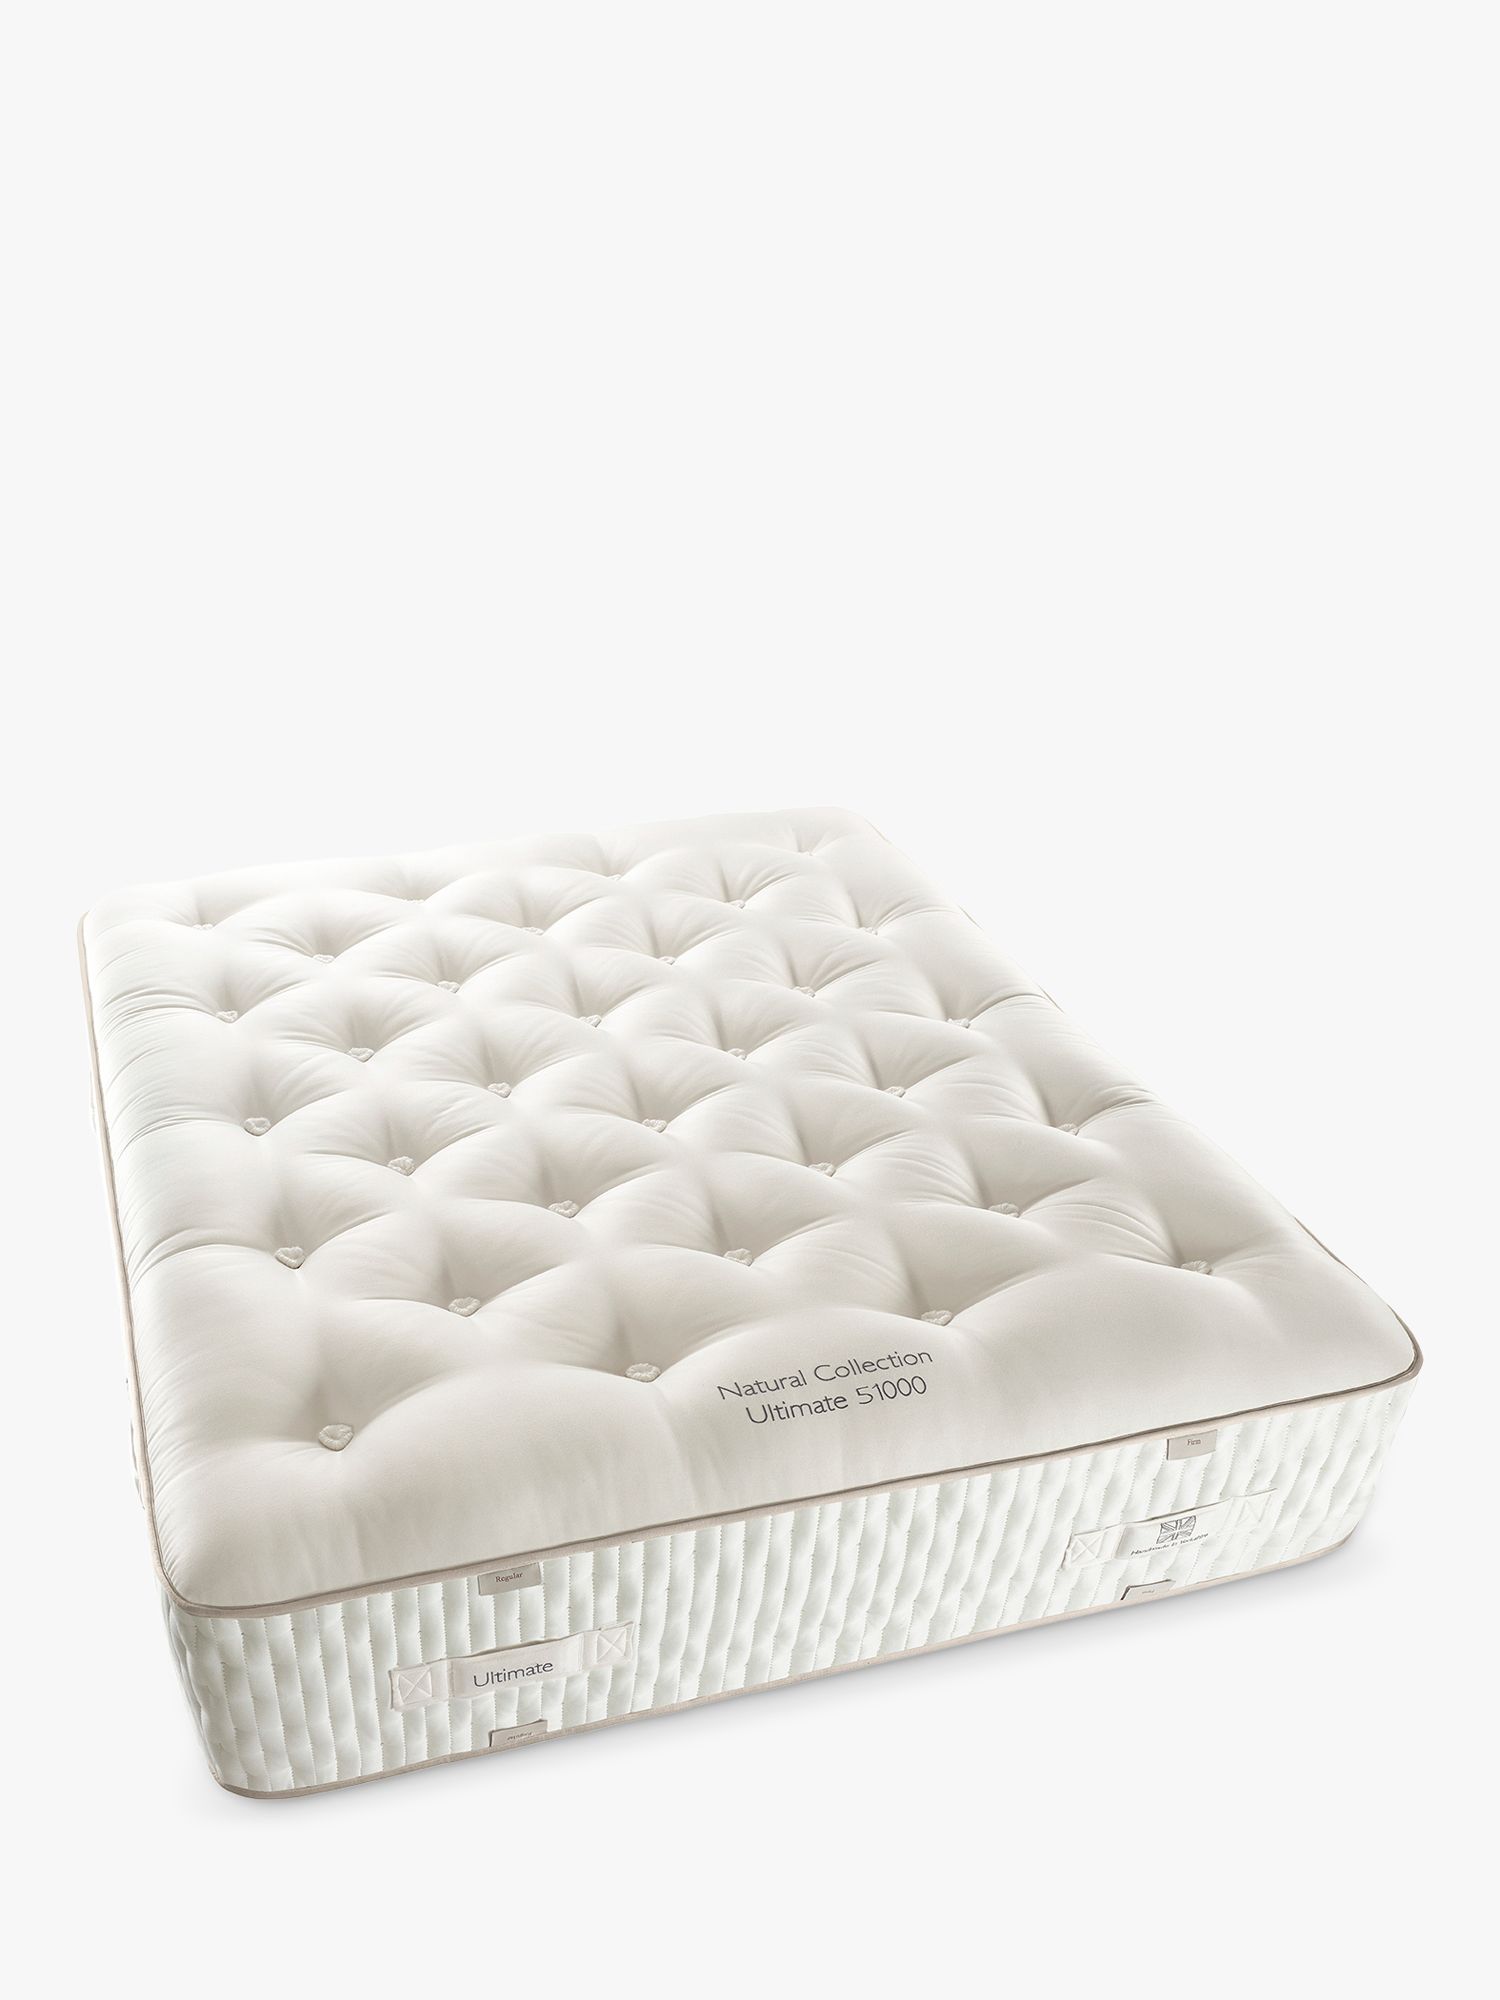 Photo of John lewis ultimate natural collection 51000 super king size firmer tension pocket spring mattress